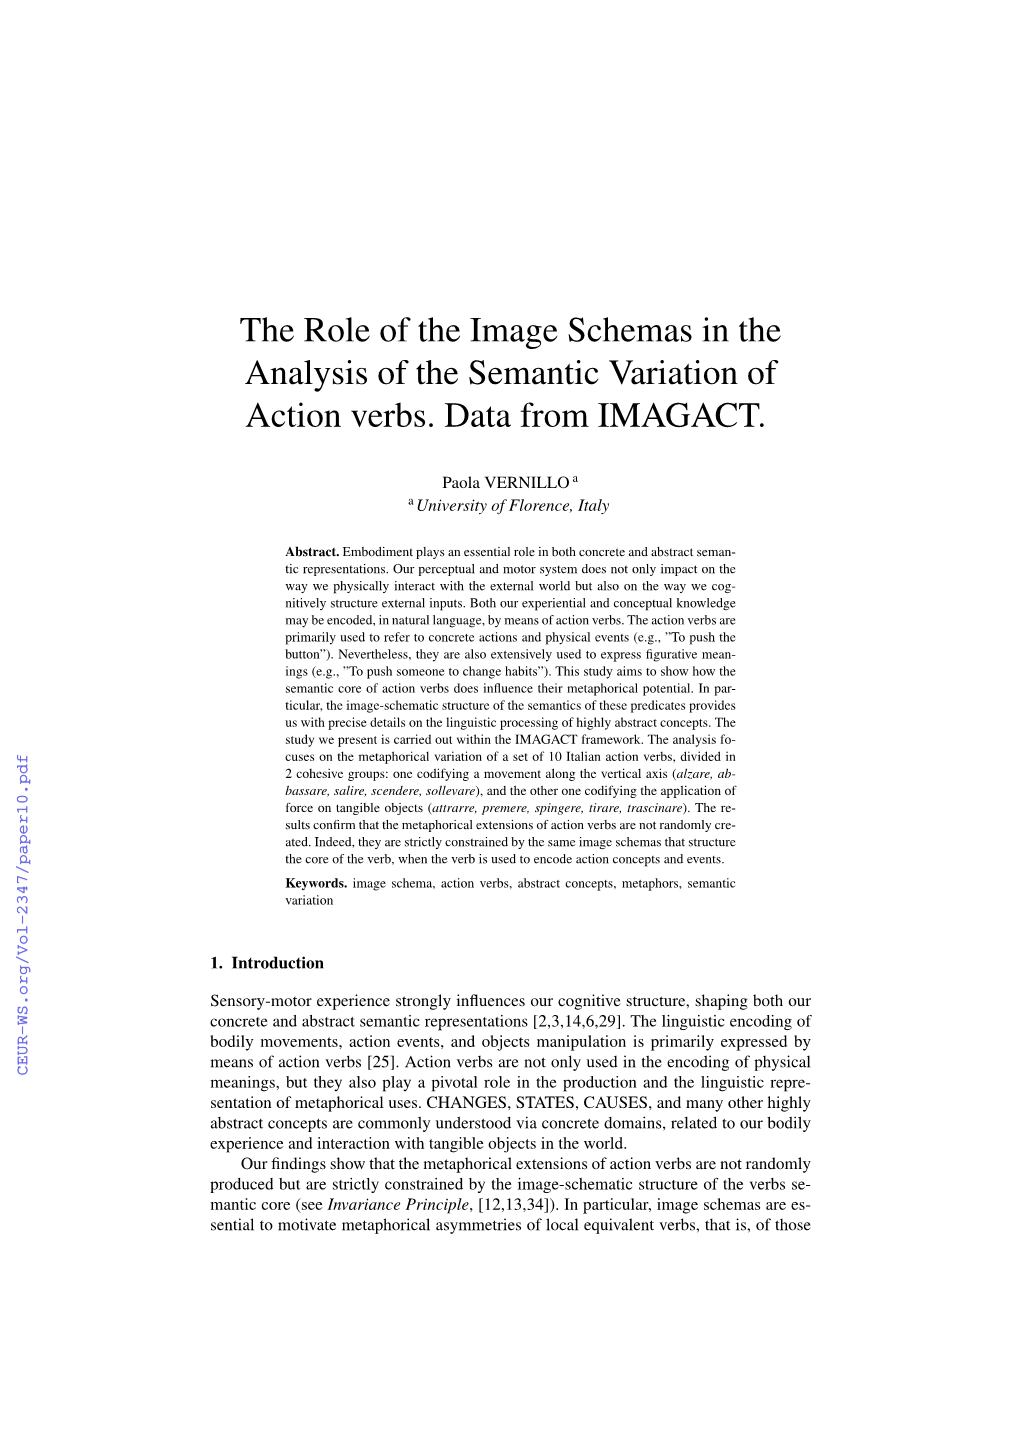 The Role of the Image Schemas in the Analysis of the Semantic Variation of Action Verbs. Data from IMAGACT